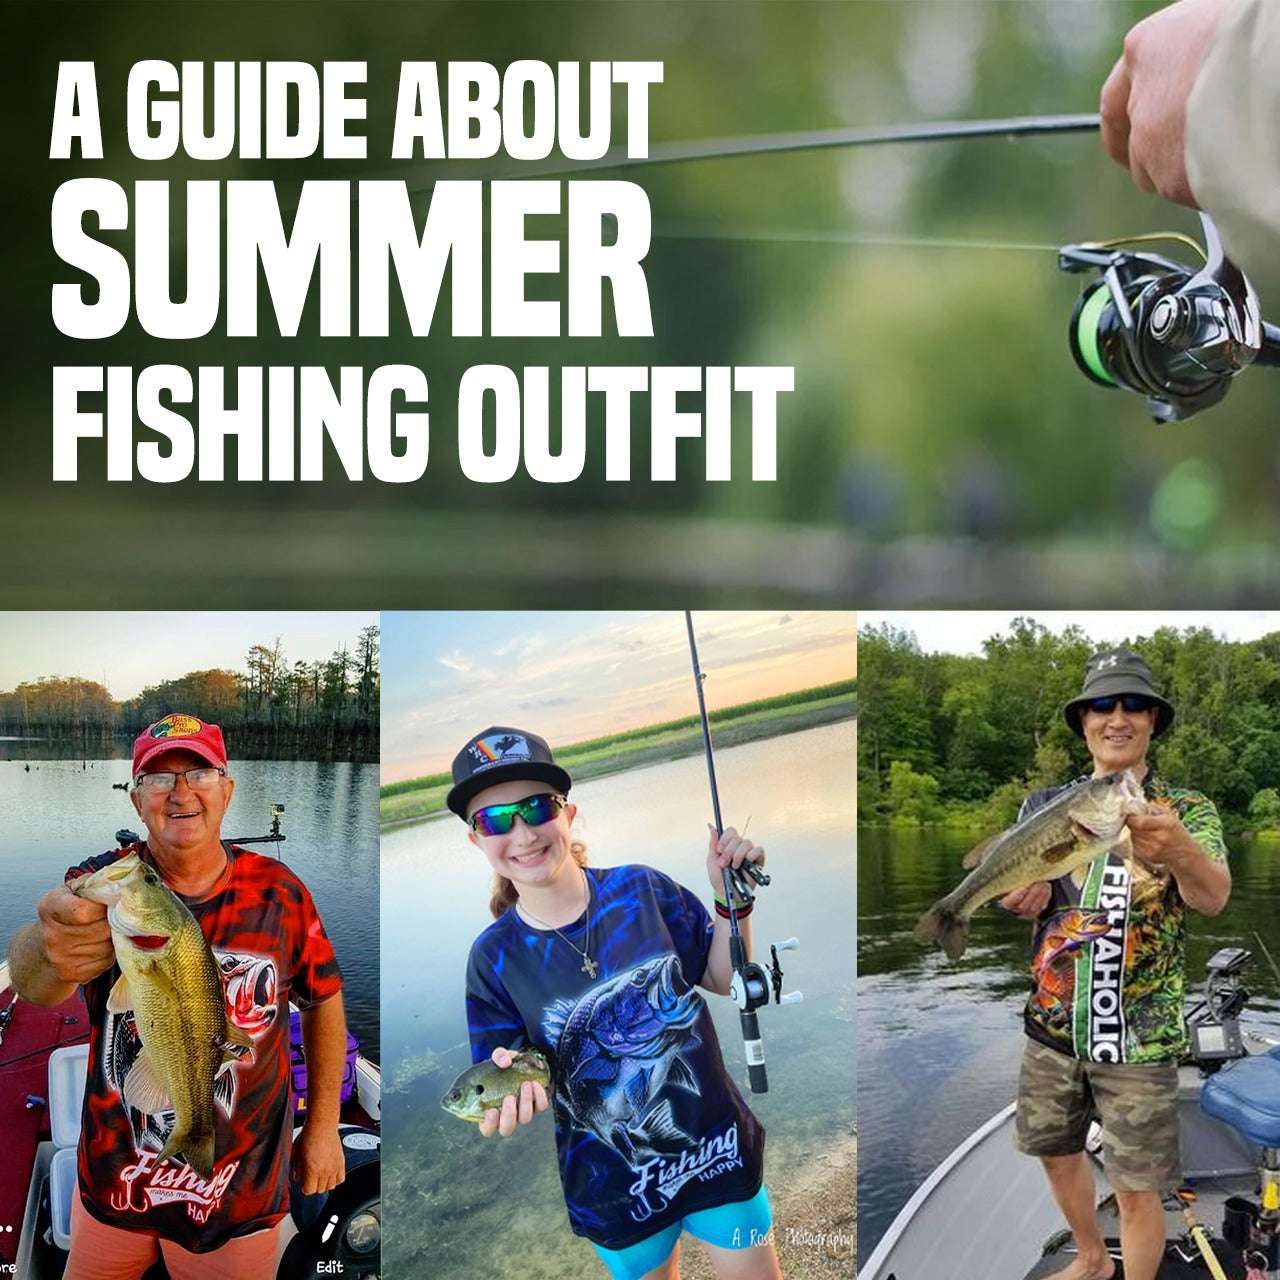 A Guide about Summer Fishing Outfit - Fishing Nice